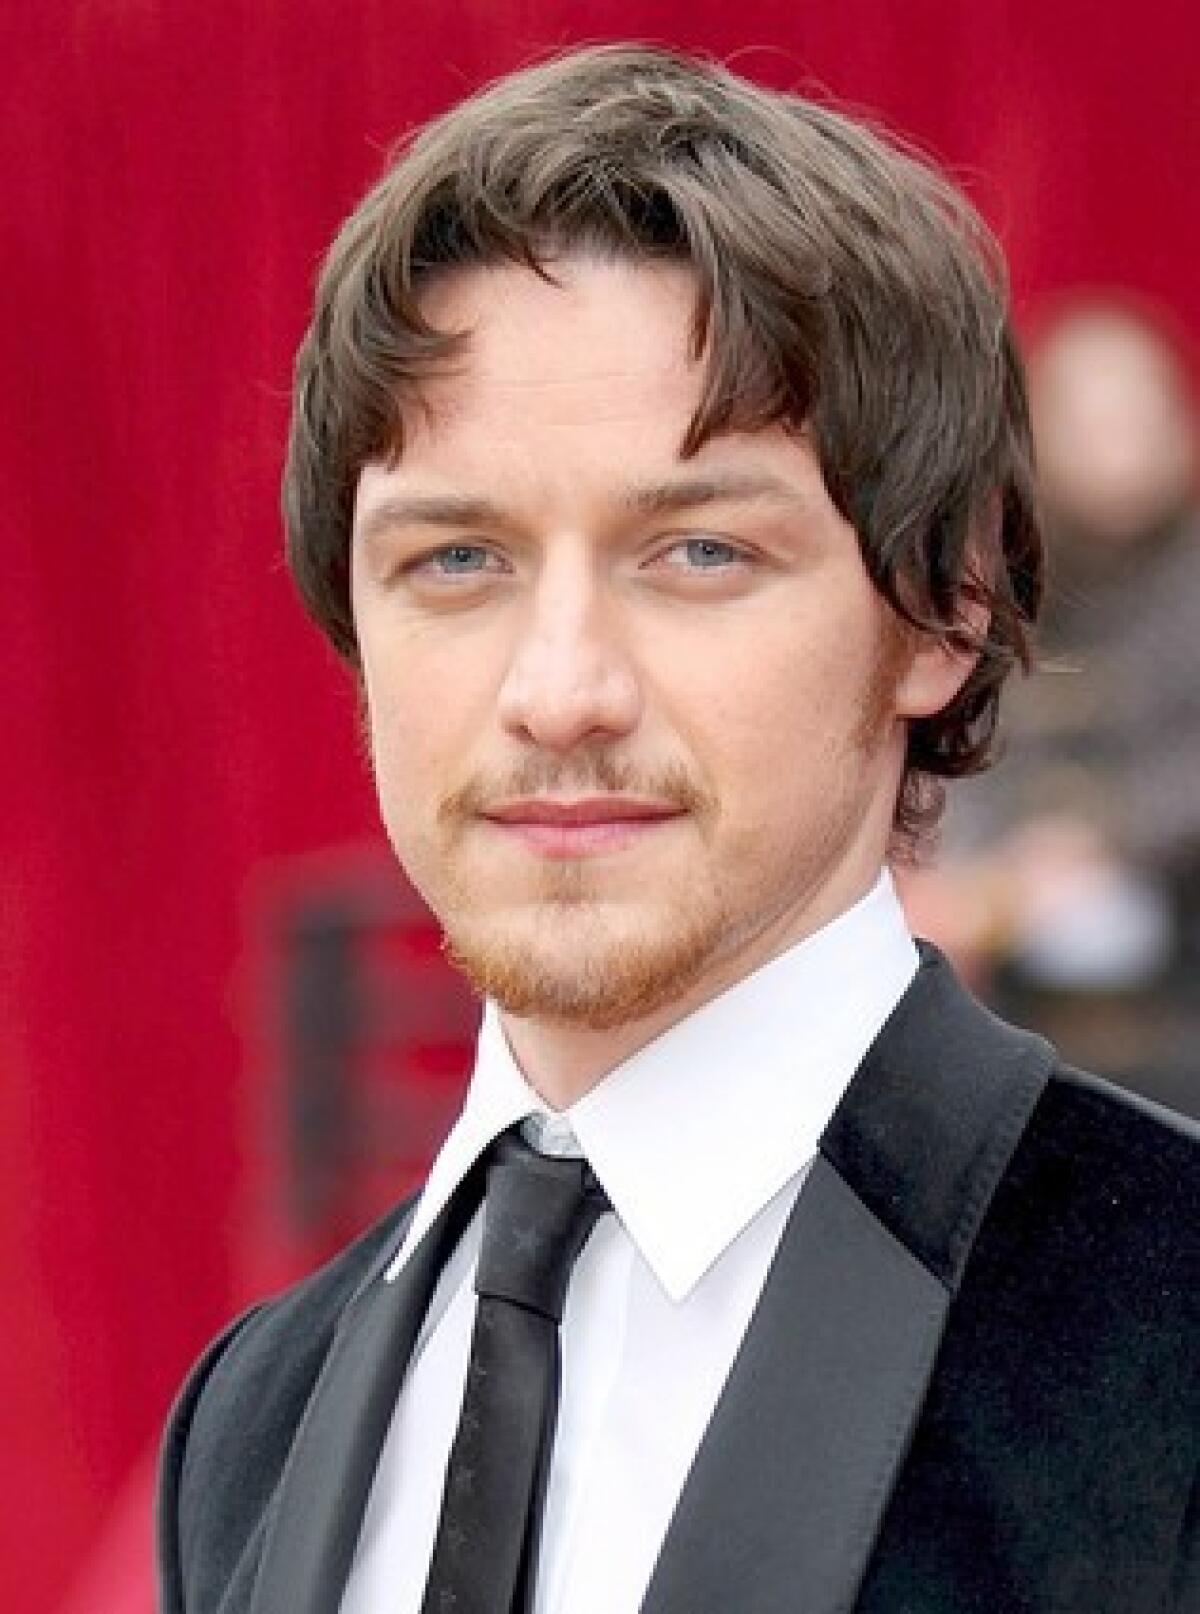 James McAvoy will voice the role of Morpheus in Audible's forthcoming adaptation of "The Sandman" by Neil Gaiman.